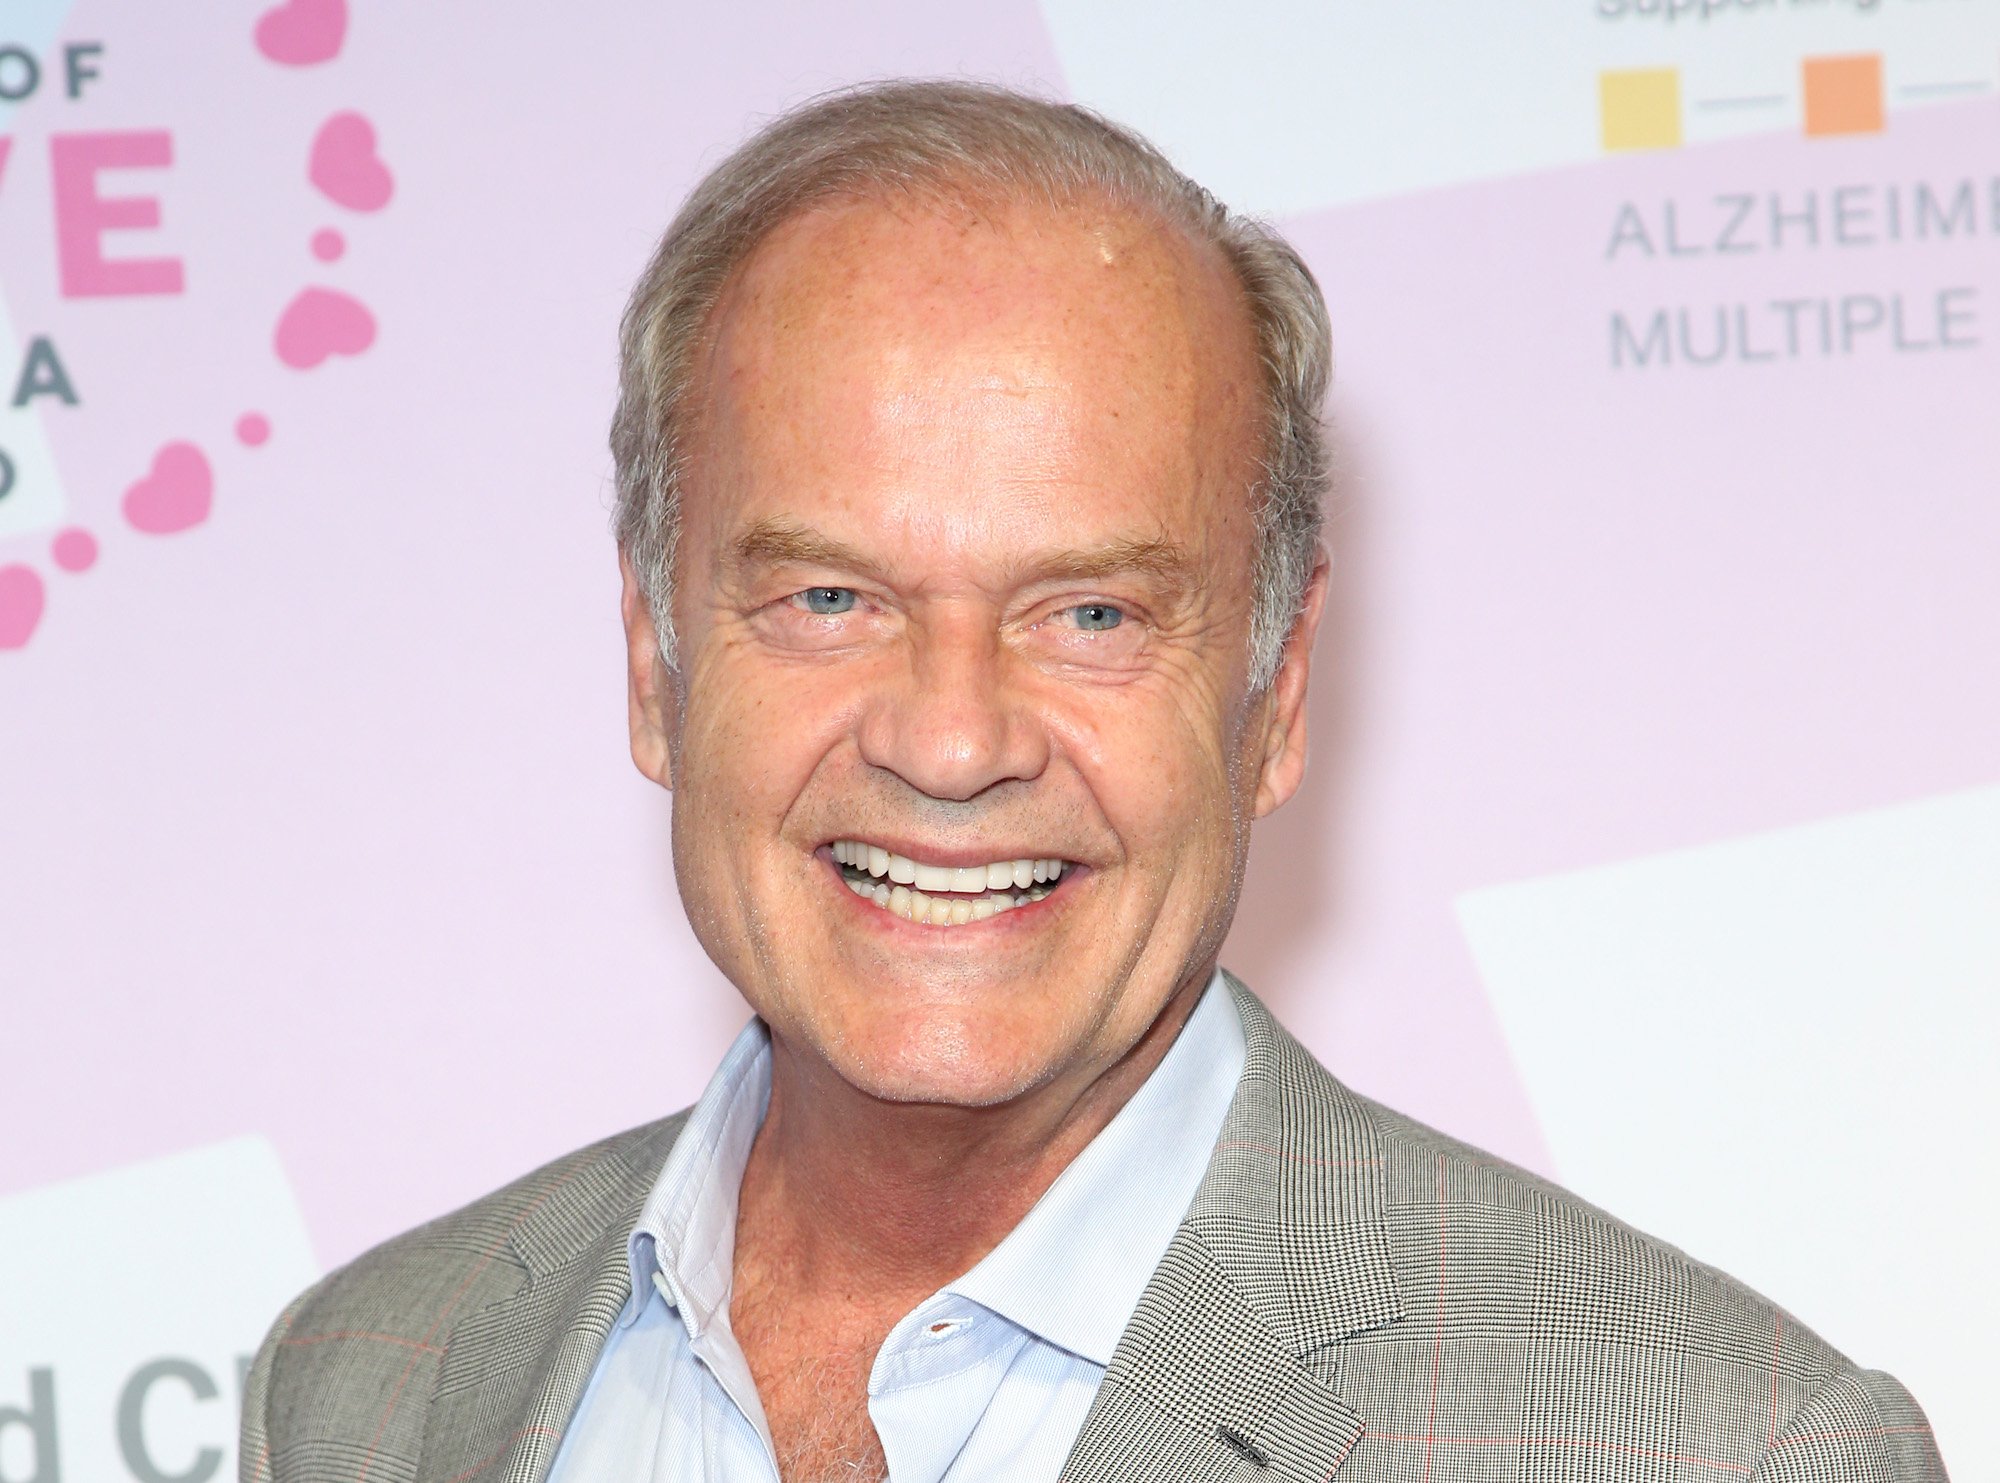 Kelsey Grammer wife one is Camille Grammer-Meyer and Kelsey Grammer spouse now is Kate Grammer. Here is Kelsey Grammer smiling in front of a pink and white backdrop